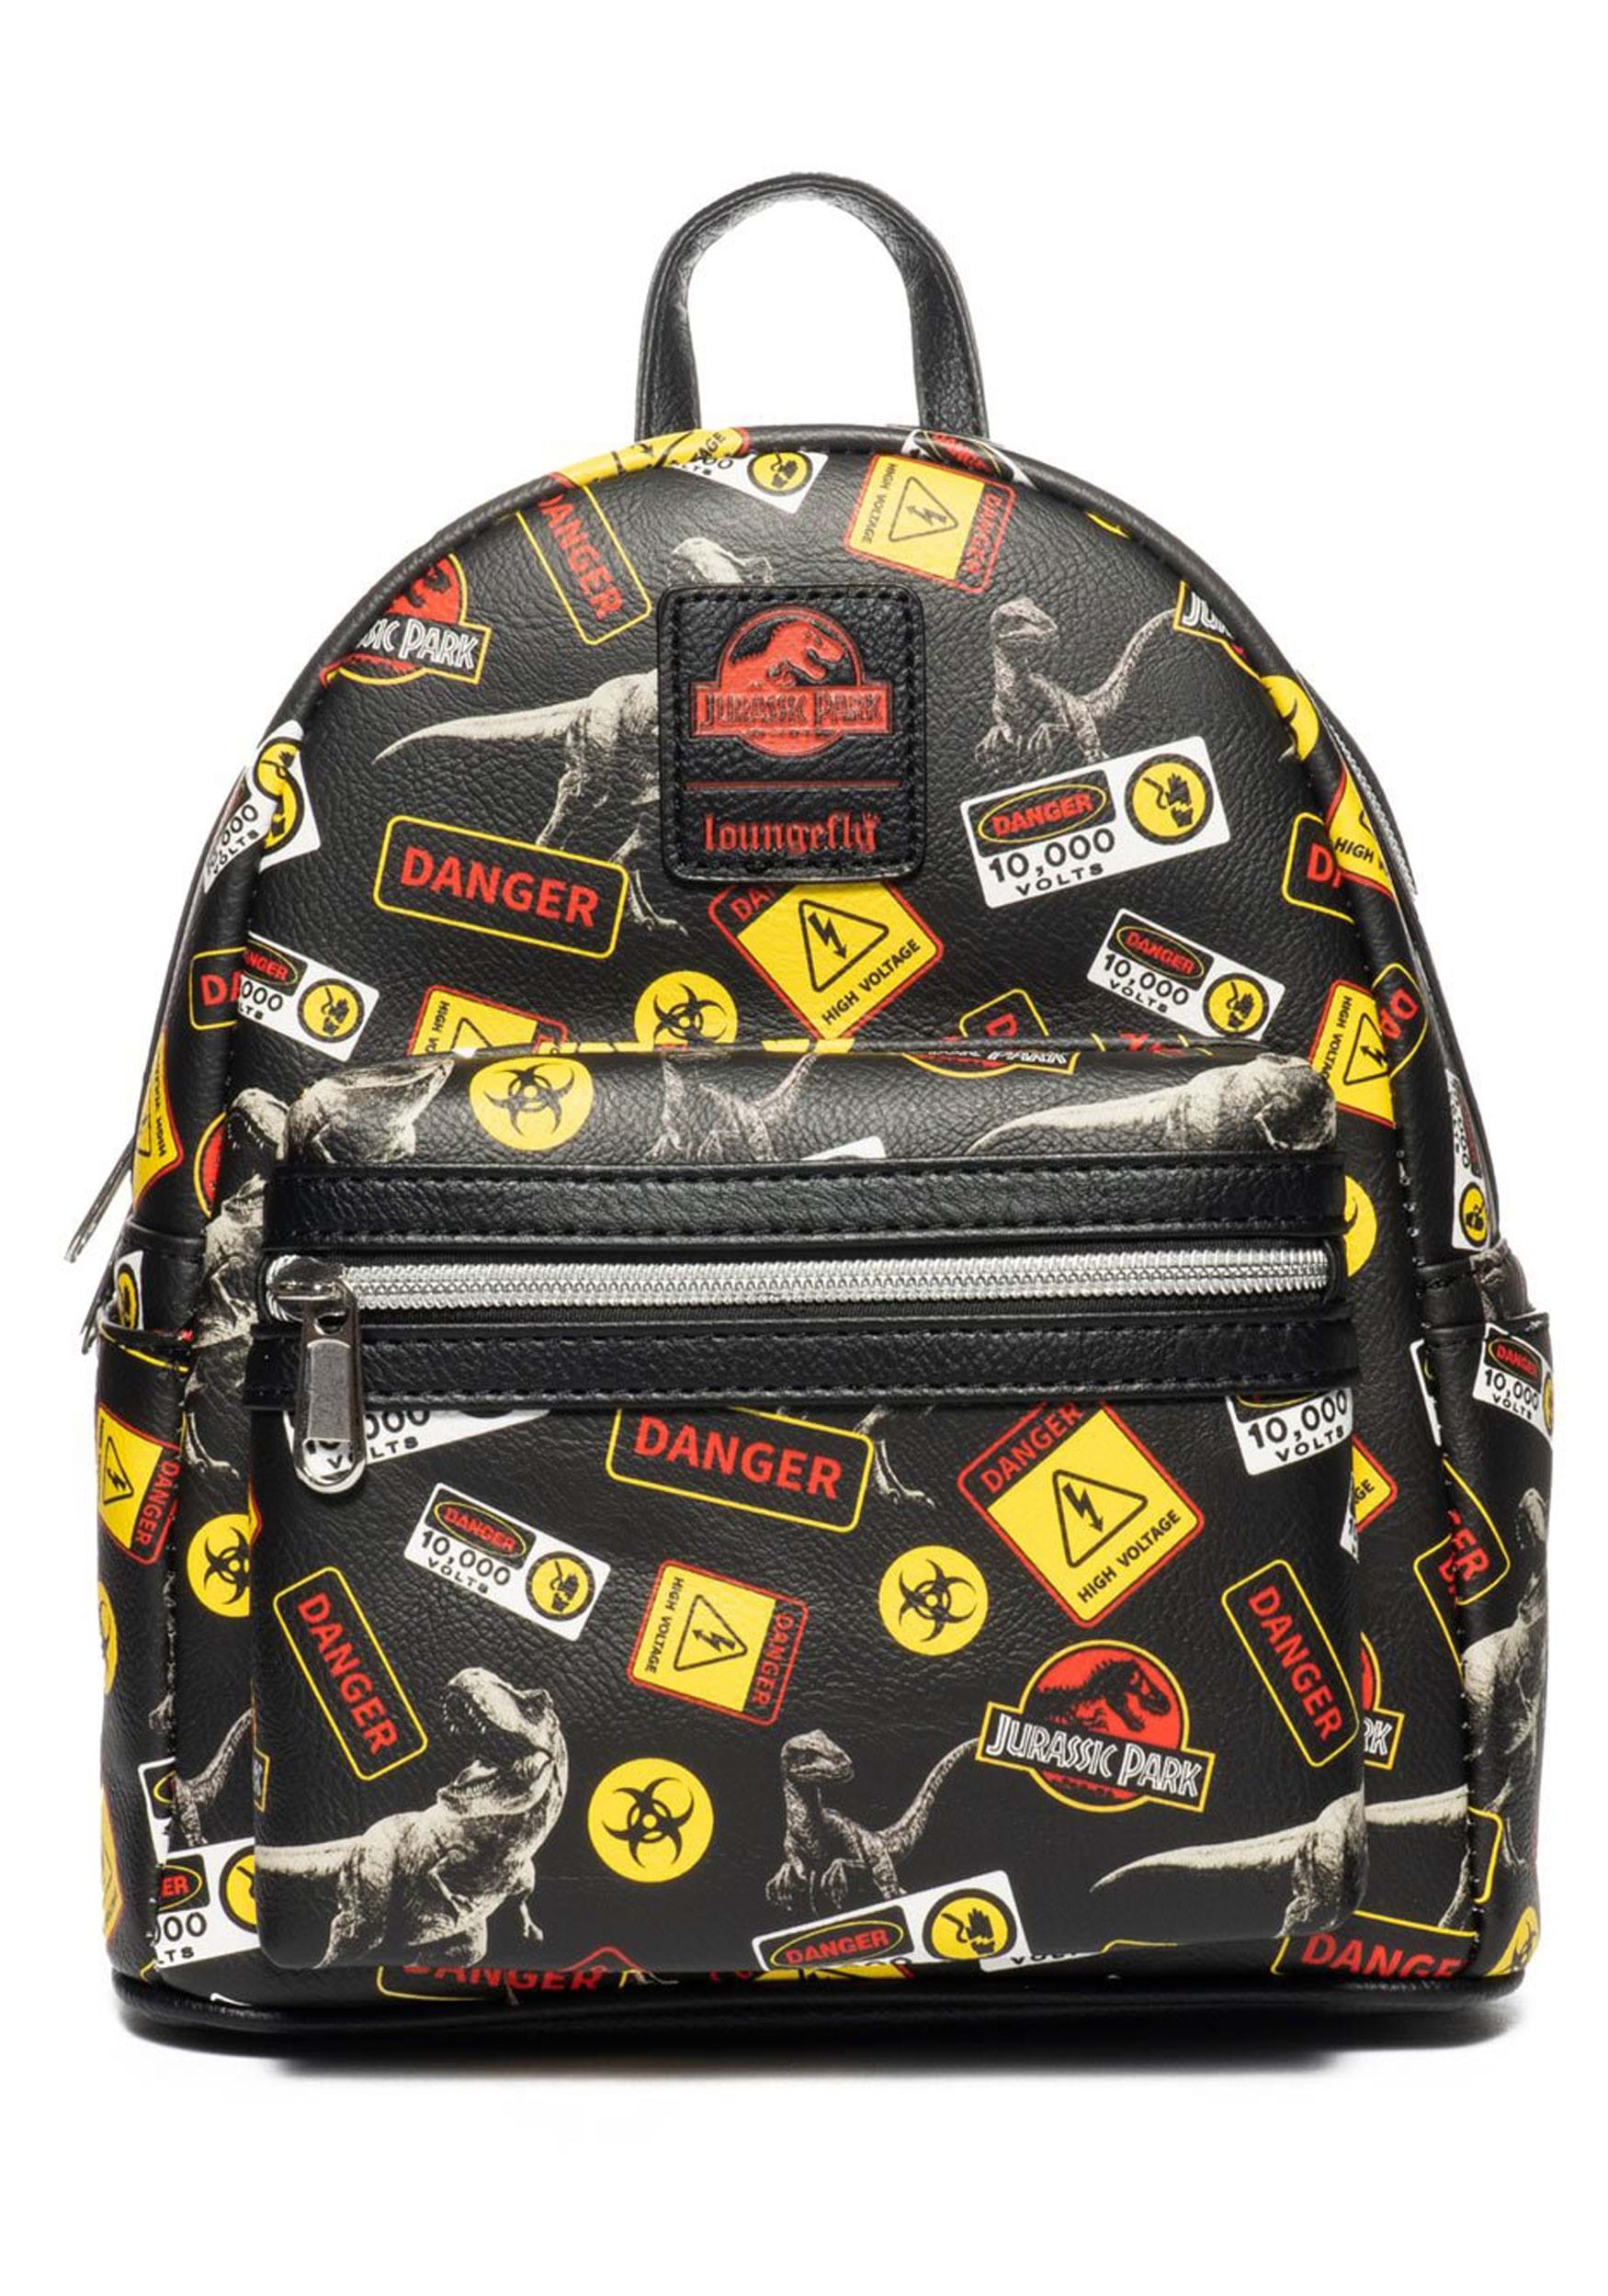 Jurassic Park Warning Signs Loungefly Mini Backpack